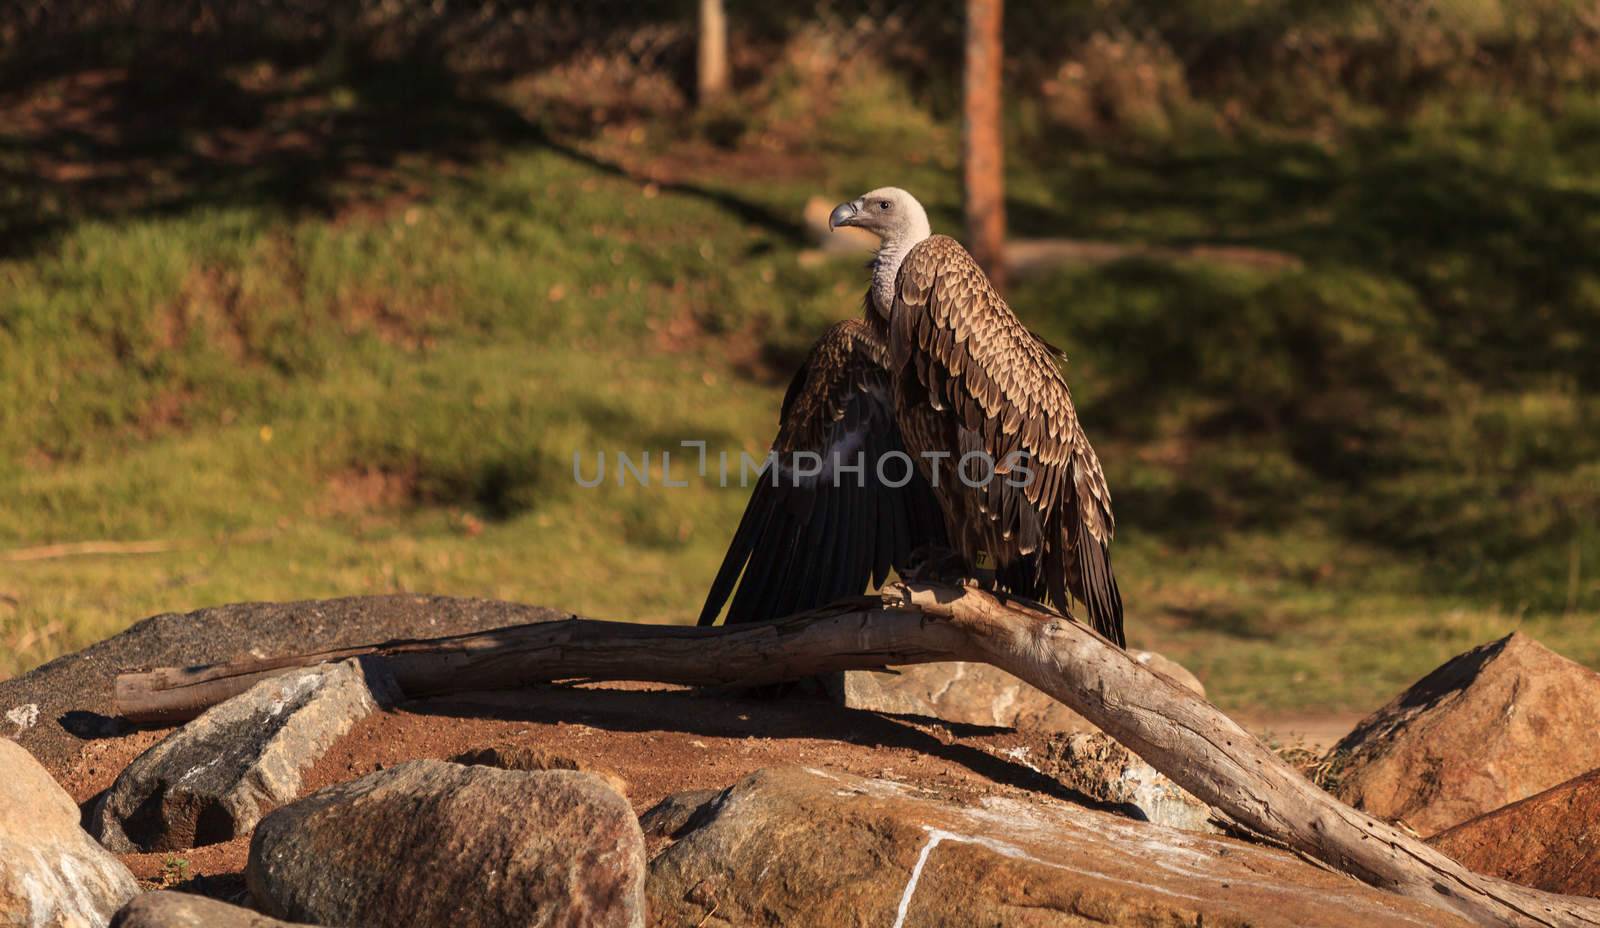 African White-backed vulture, Gyps africanus, is found on the savannah